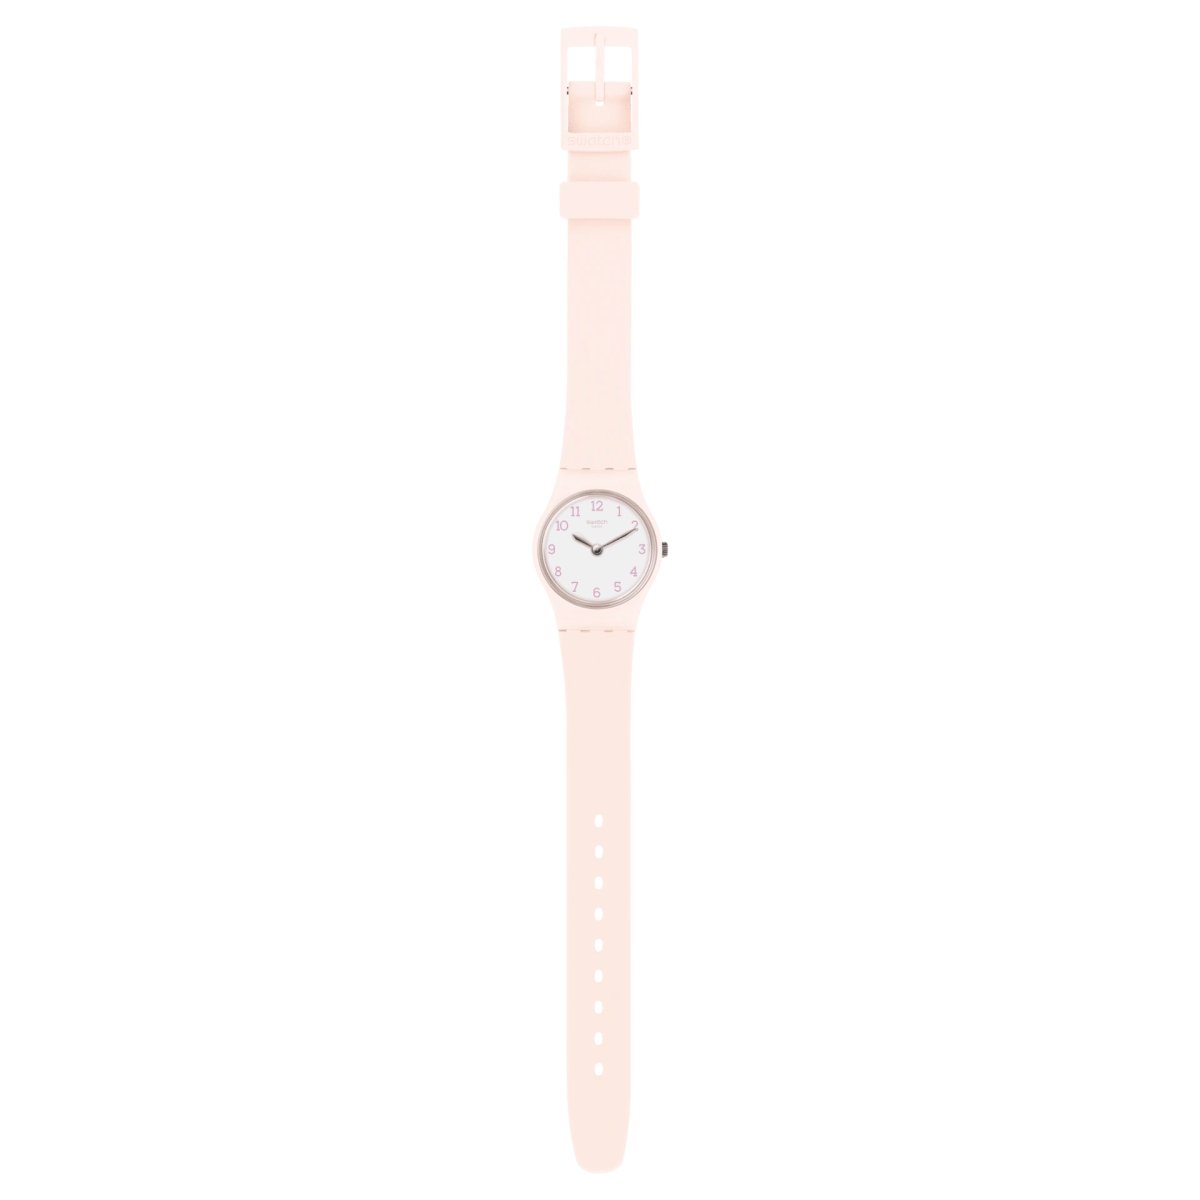 TIME TO SWATCH PINKBELLE - LP150 - Simmi Gioiellerie -Orologi